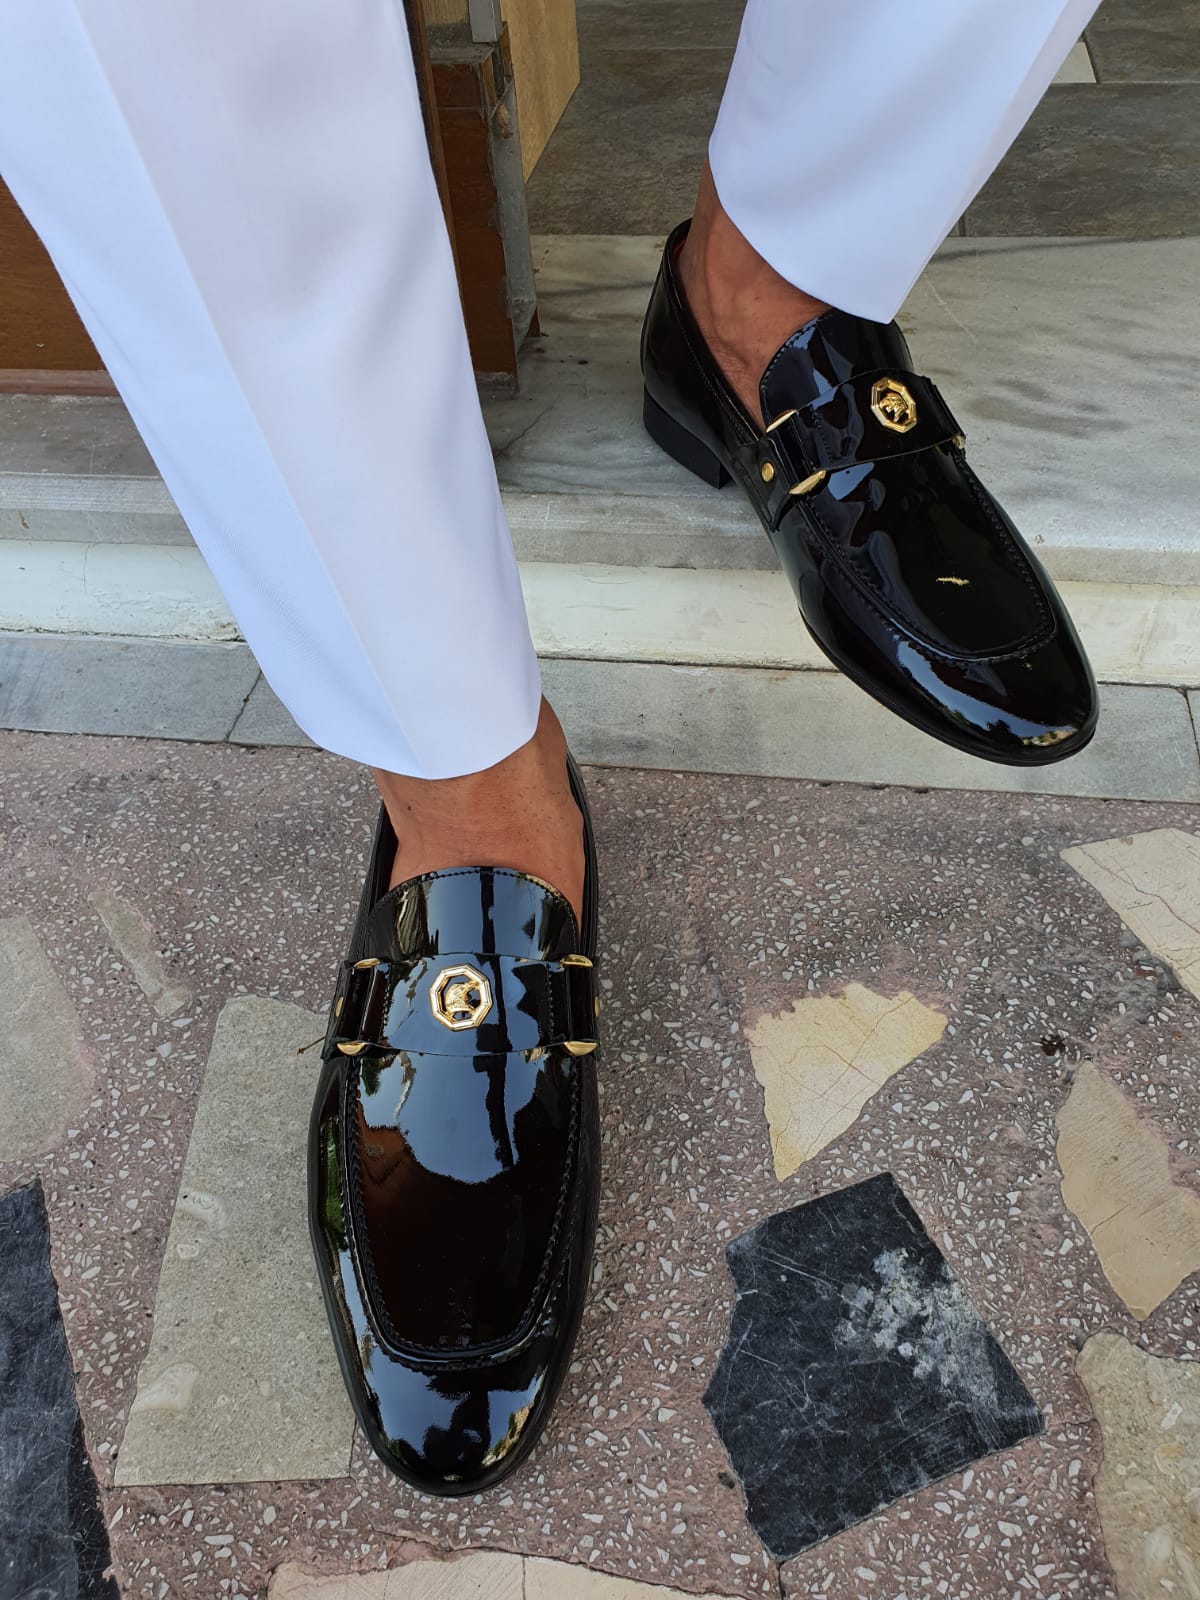 Gucci Patent Leather Shoes for Men